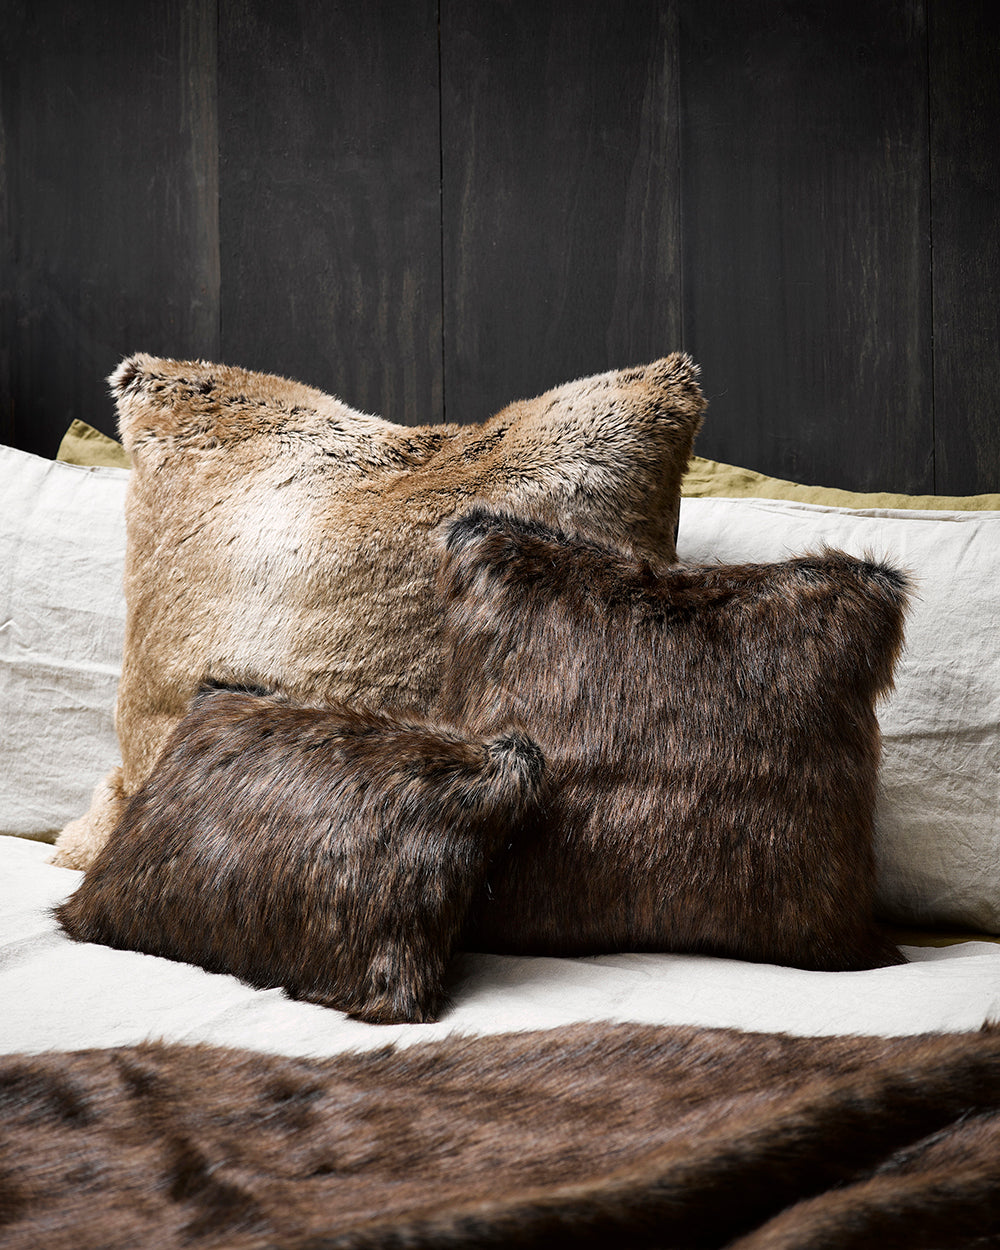 Heirloom Husky Cushions in Faux Fur are available from Make Your House A Home Premium Stockist. Furniture Store Bendigo, Victoria. Australia Wide Delivery. Furtex Baya.